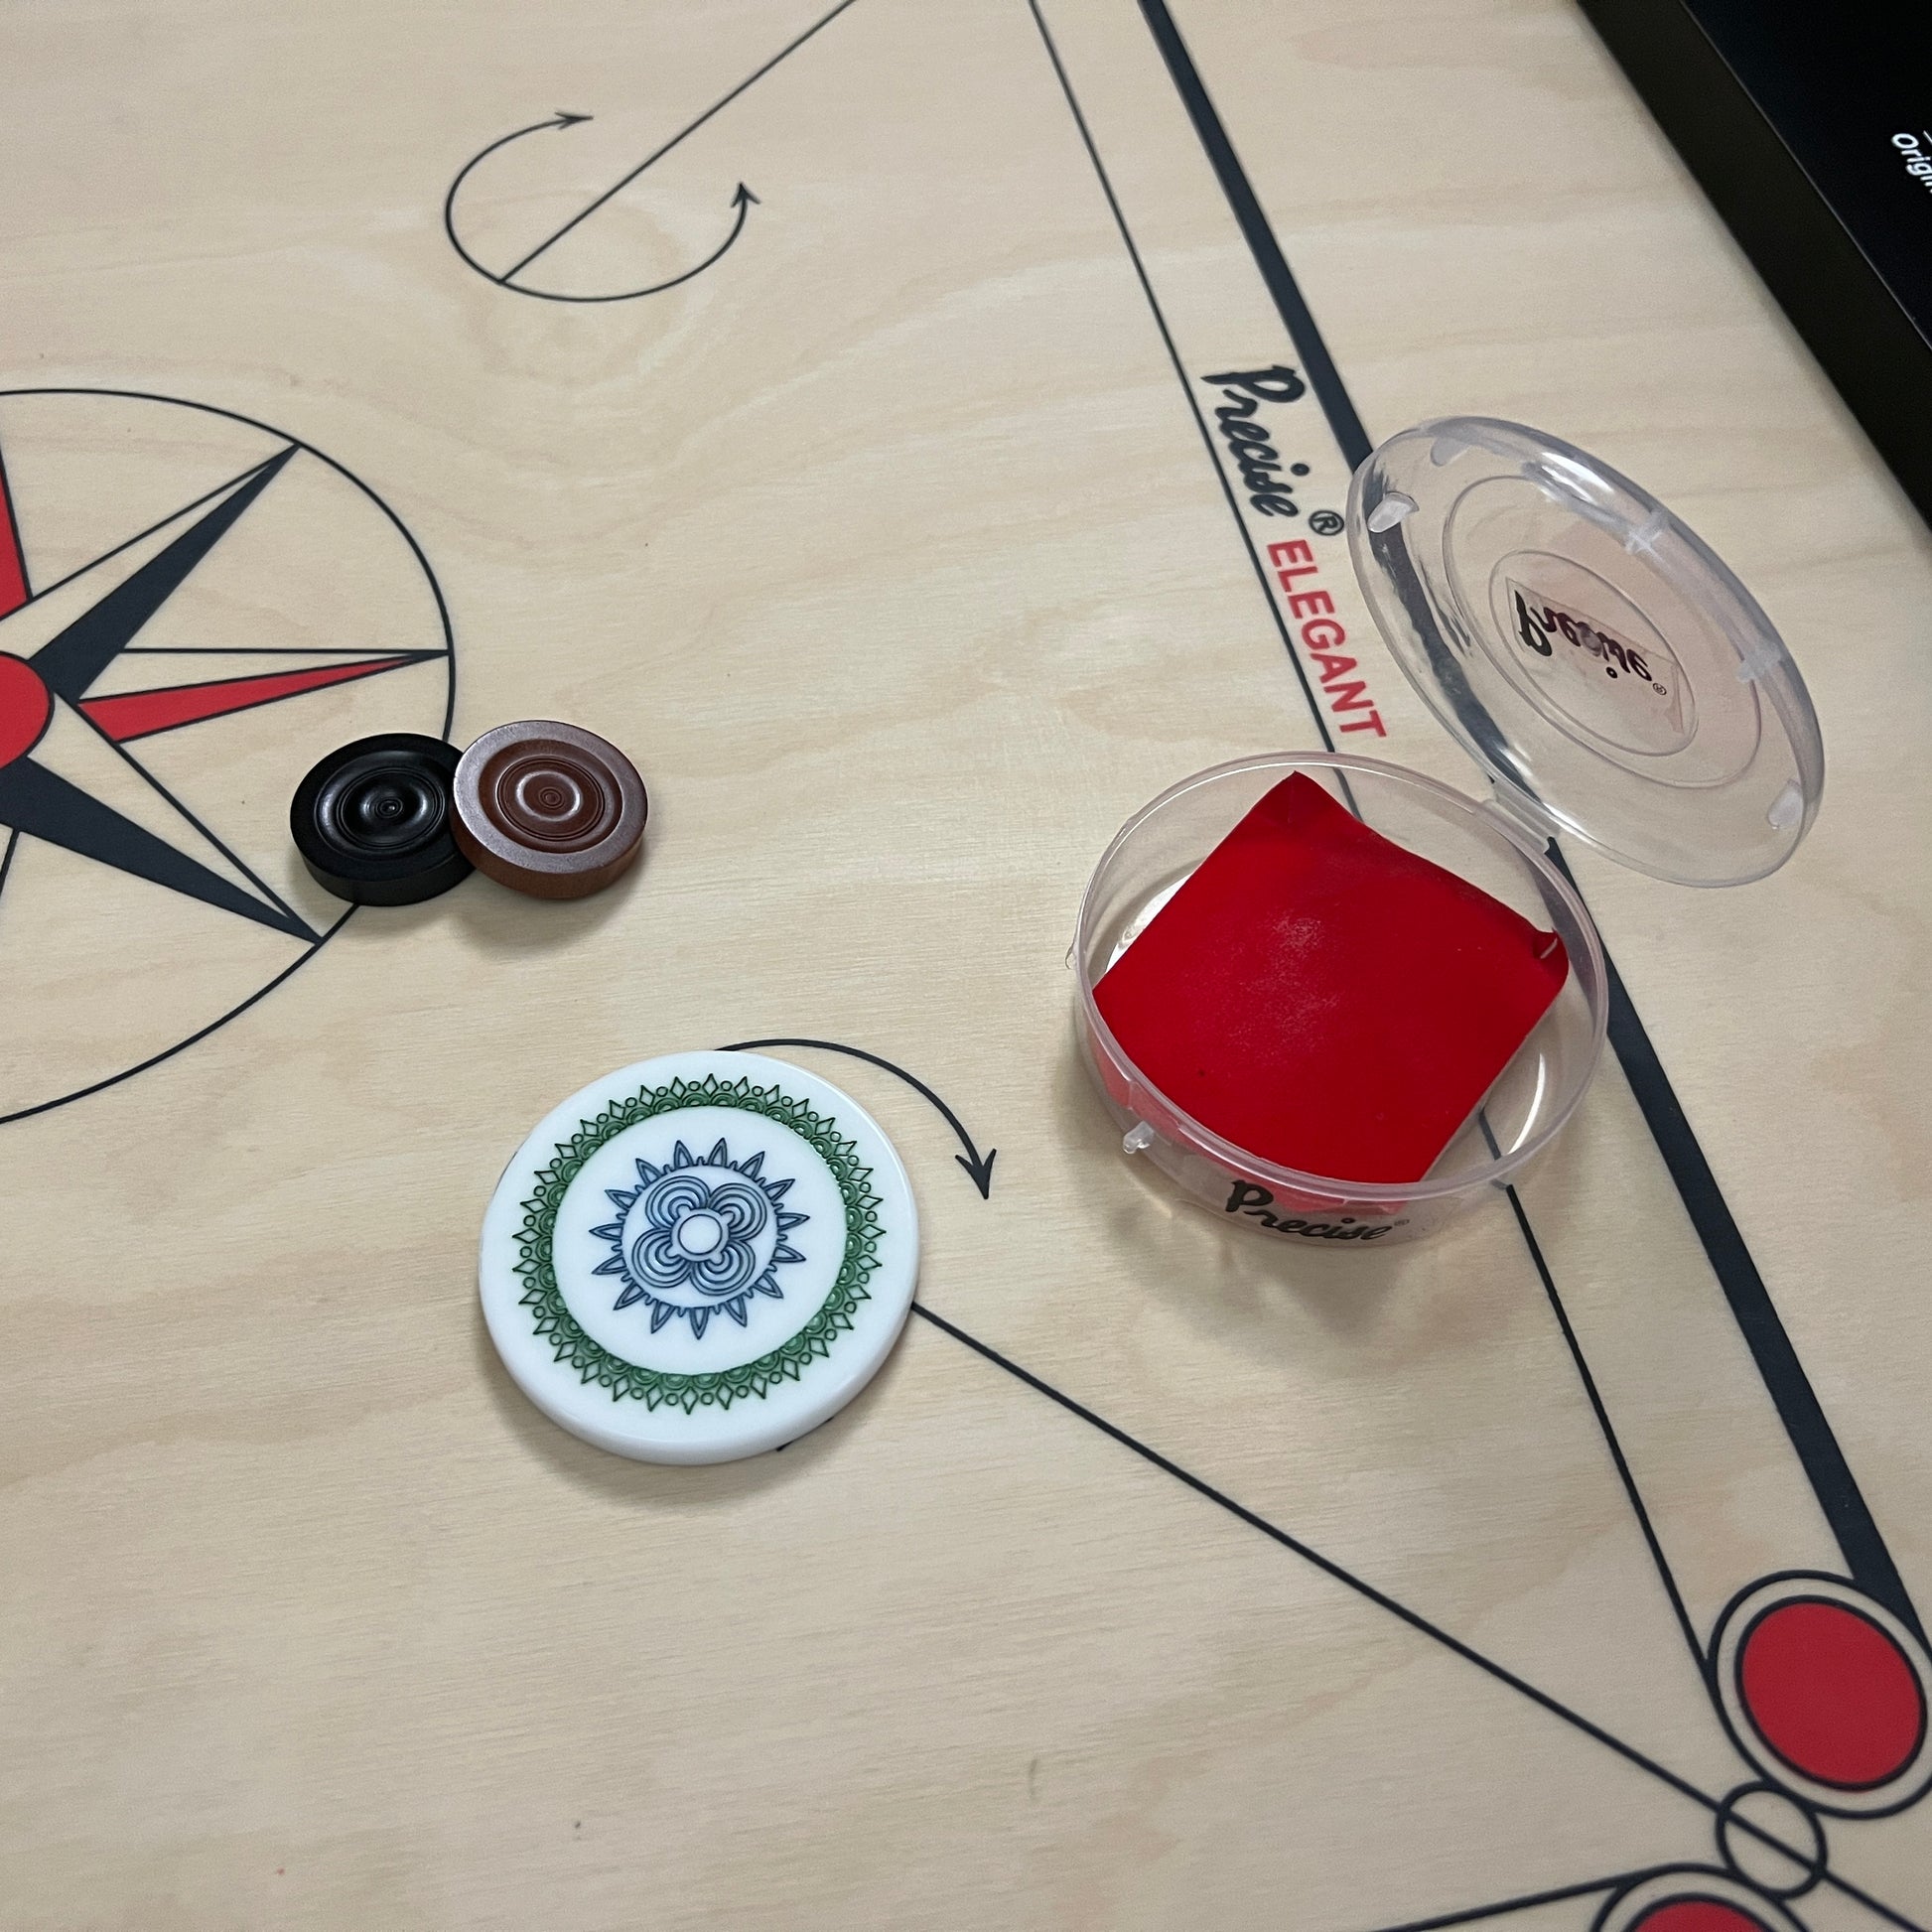 2.5 inch Precise carrom striker, weighing approximately 25 grams, designed for professional play, packed in a plastic box with a unique design, exclusively from Black Ash Sports.